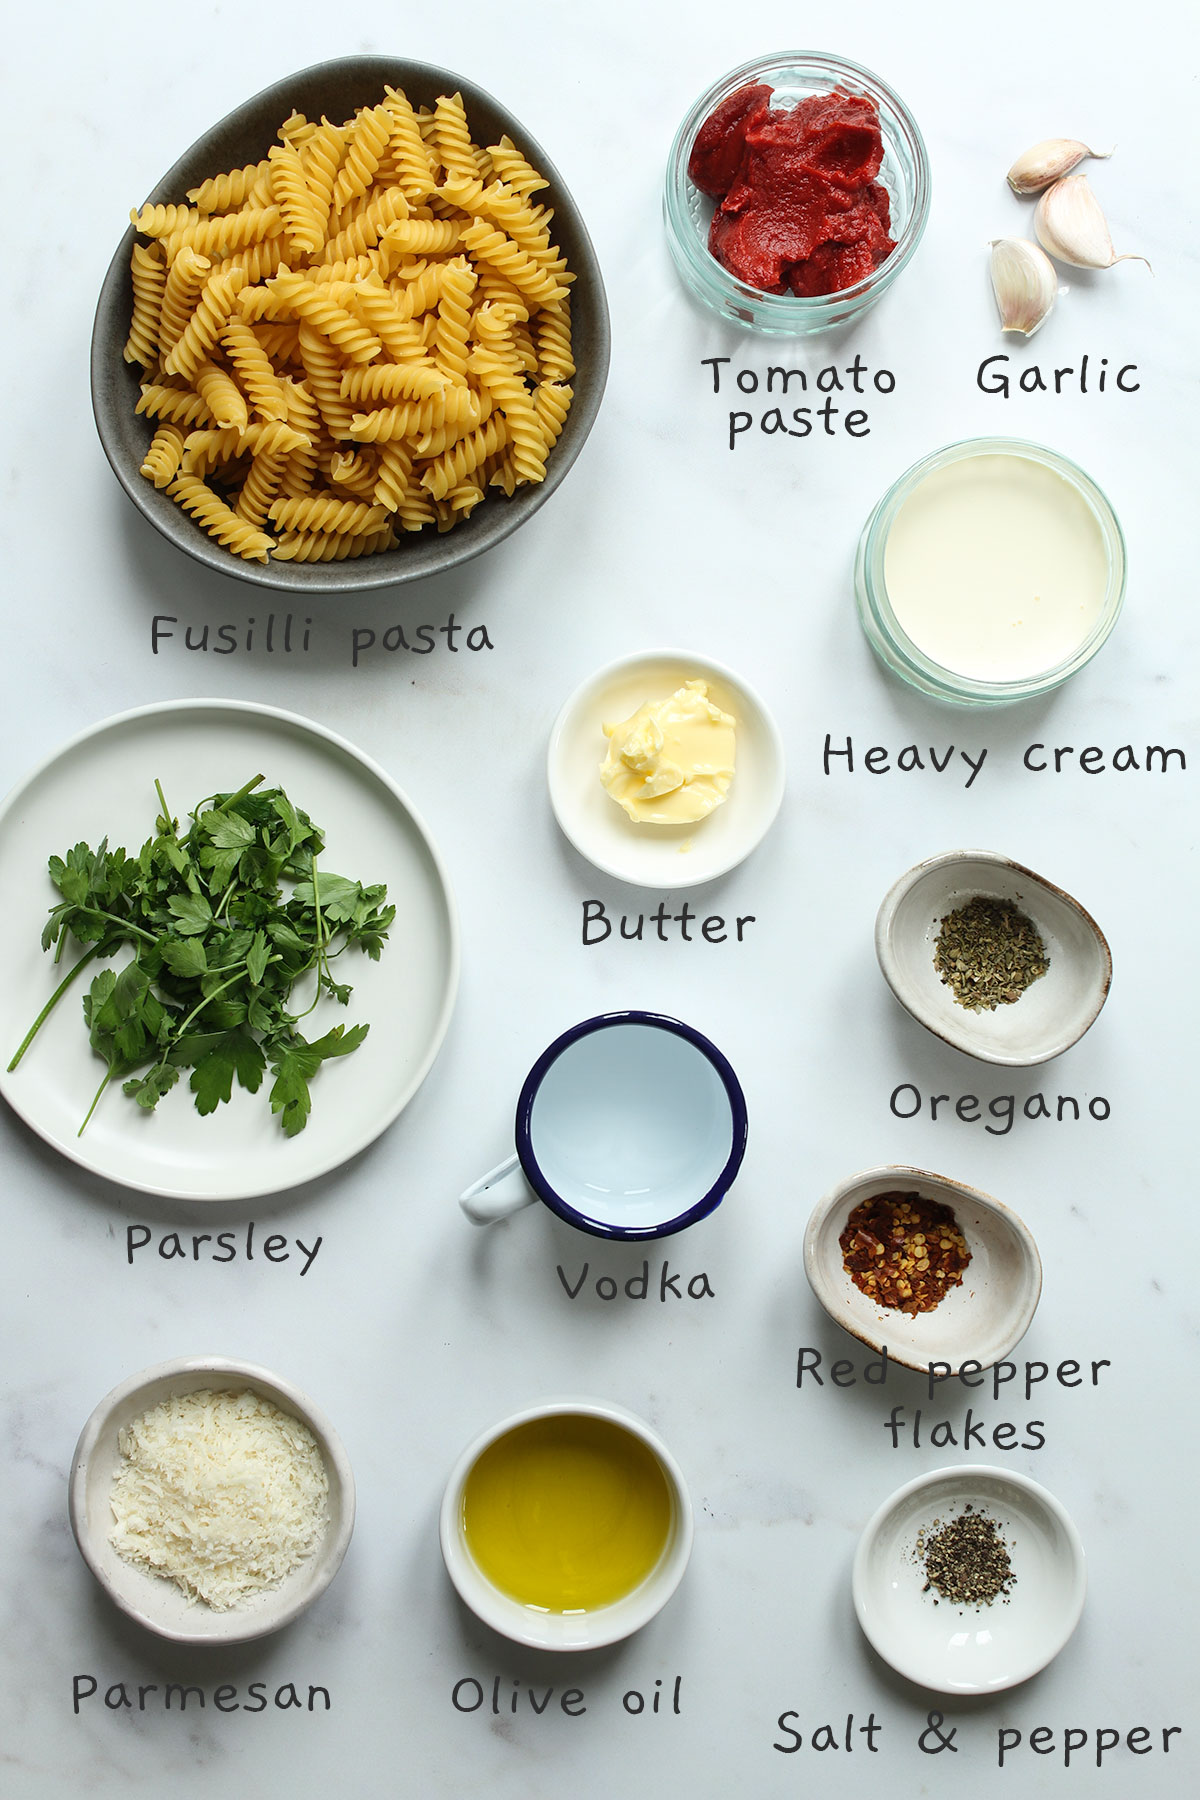 Ingredients laid out on a white background.